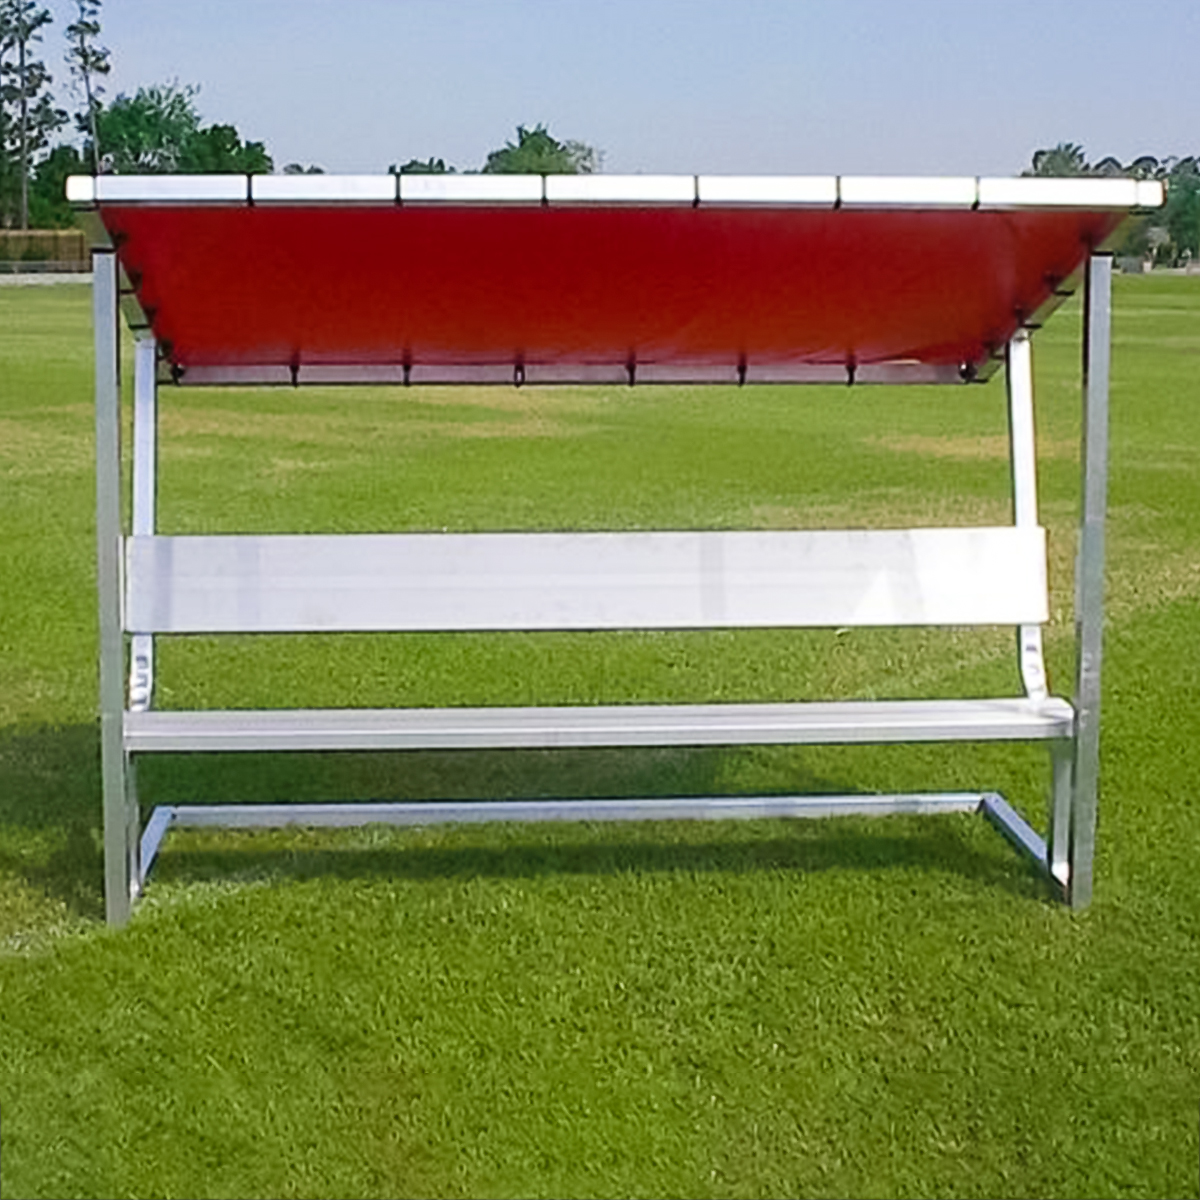 Covered Athletic Team Bench ⋆ - Athletic Your Equipment Keeper Goals